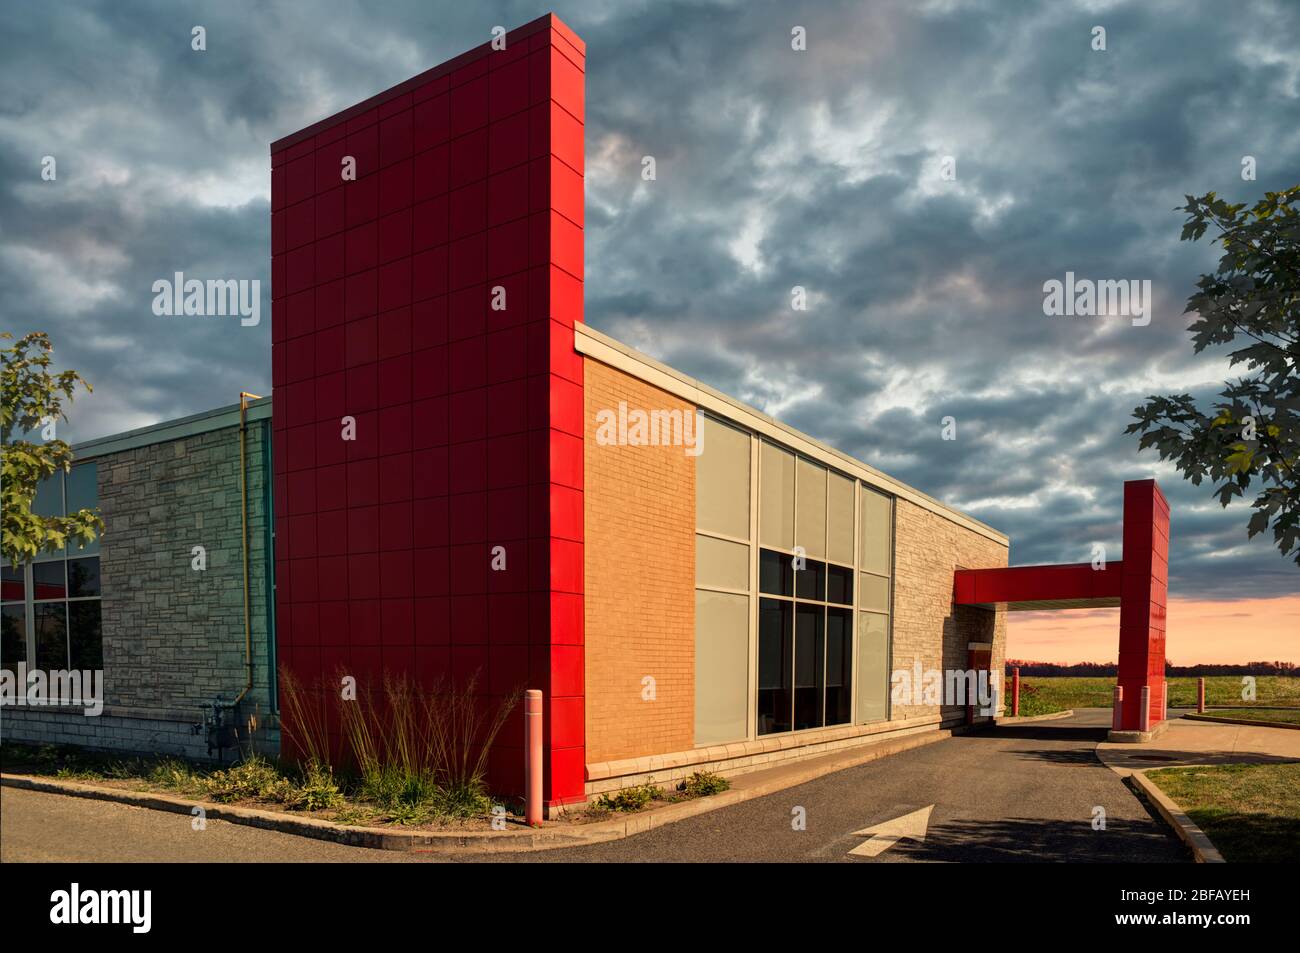 Bank drive thru on a summer day, cloudy sky in background. Stock Photo